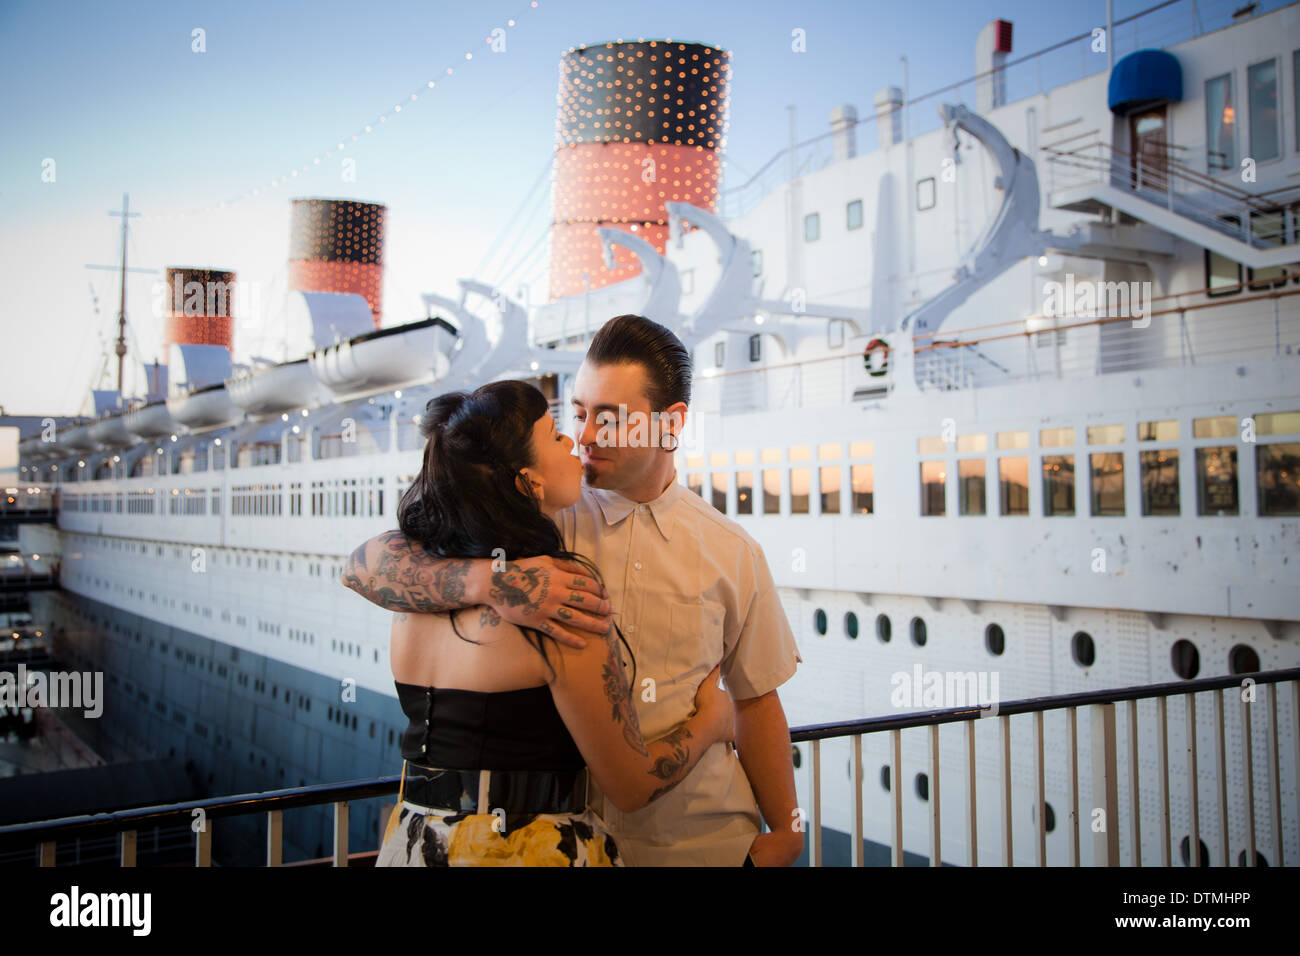 rockabilly couple love snuggle cuddle each other at the queen mary in long beach california on a boat Stock Photo